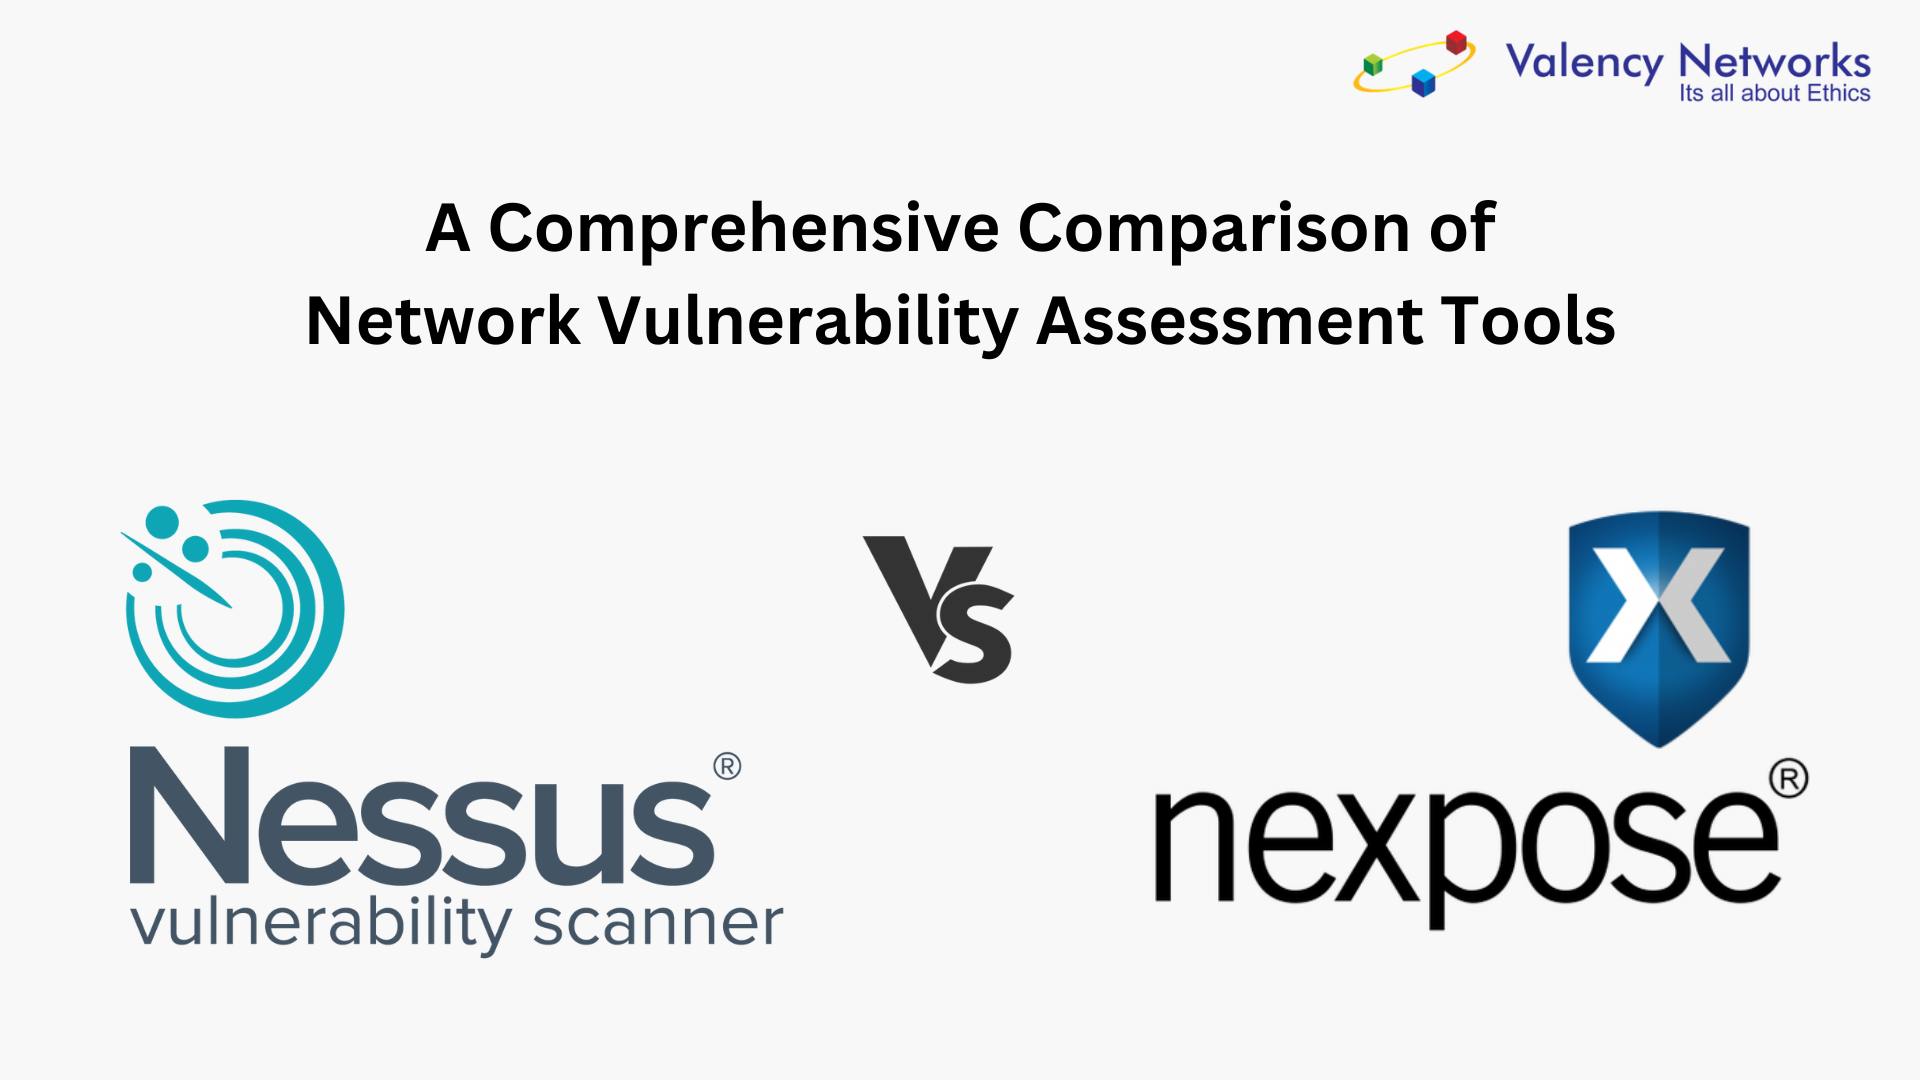 A Comprehensive Comparison of Nessus and Nexpose in Network Vulnerability Assessment